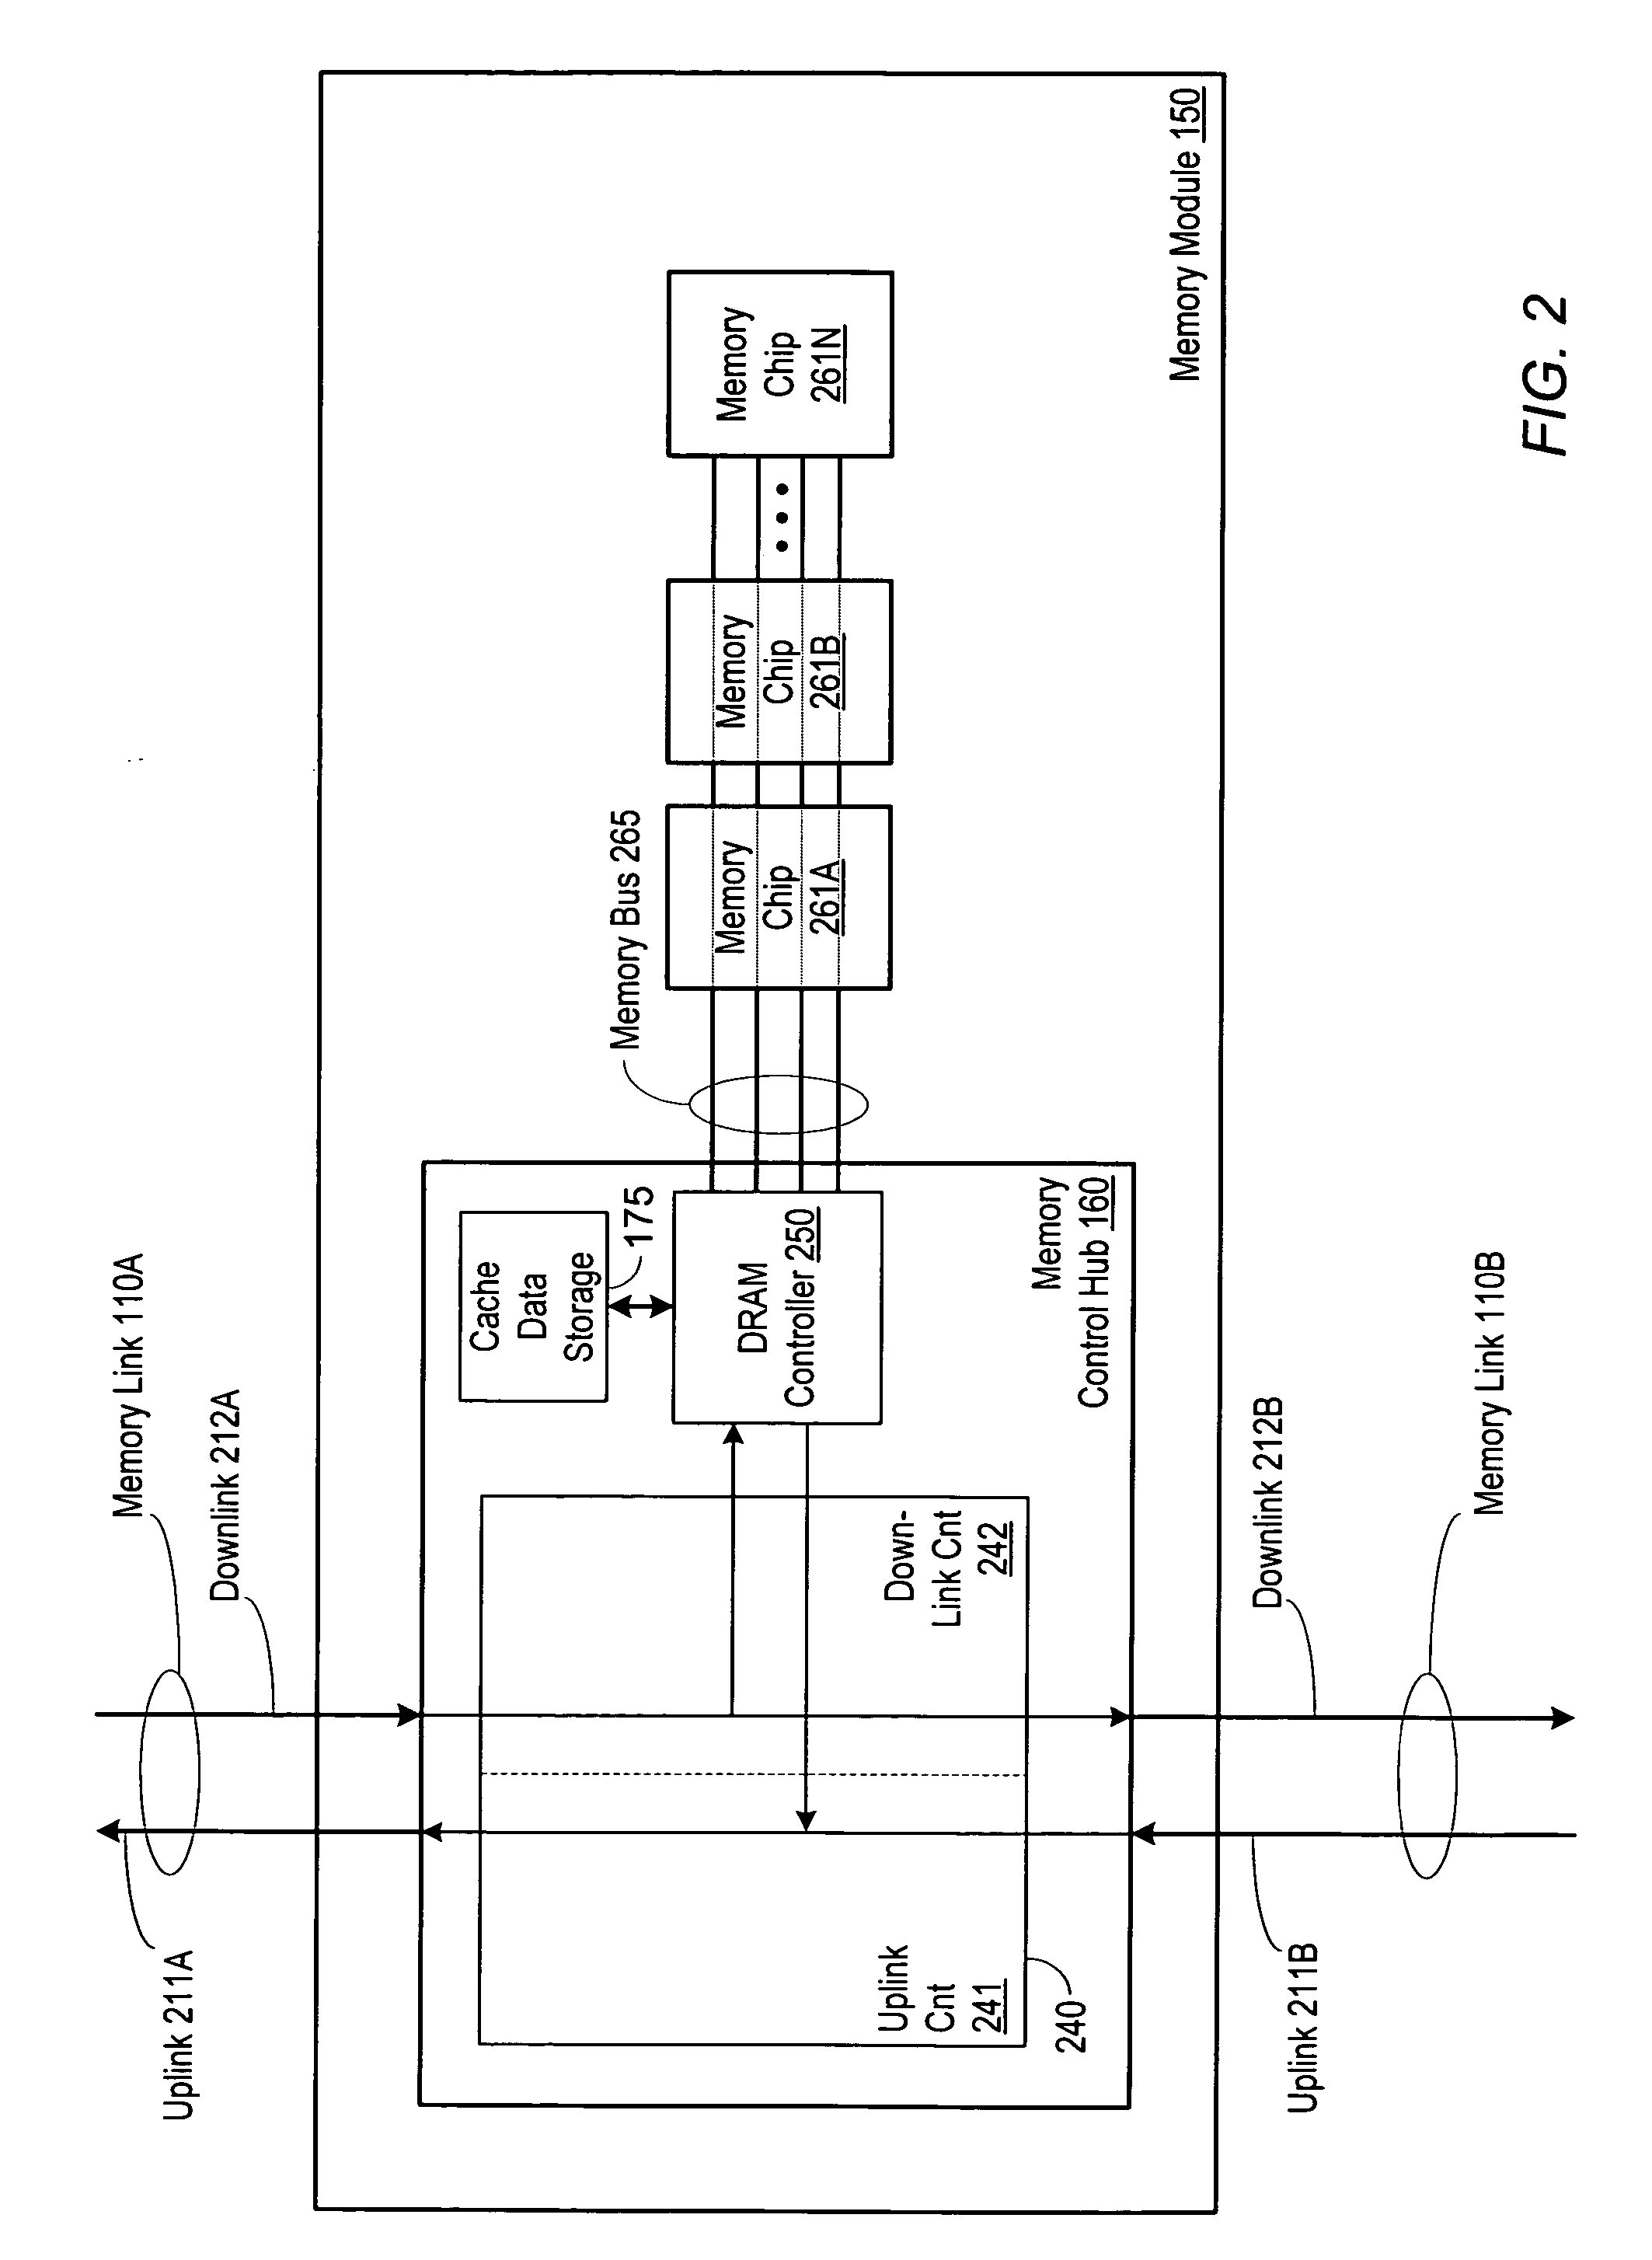 System including a host connected serially in a chain to one or more memory modules that include a cache